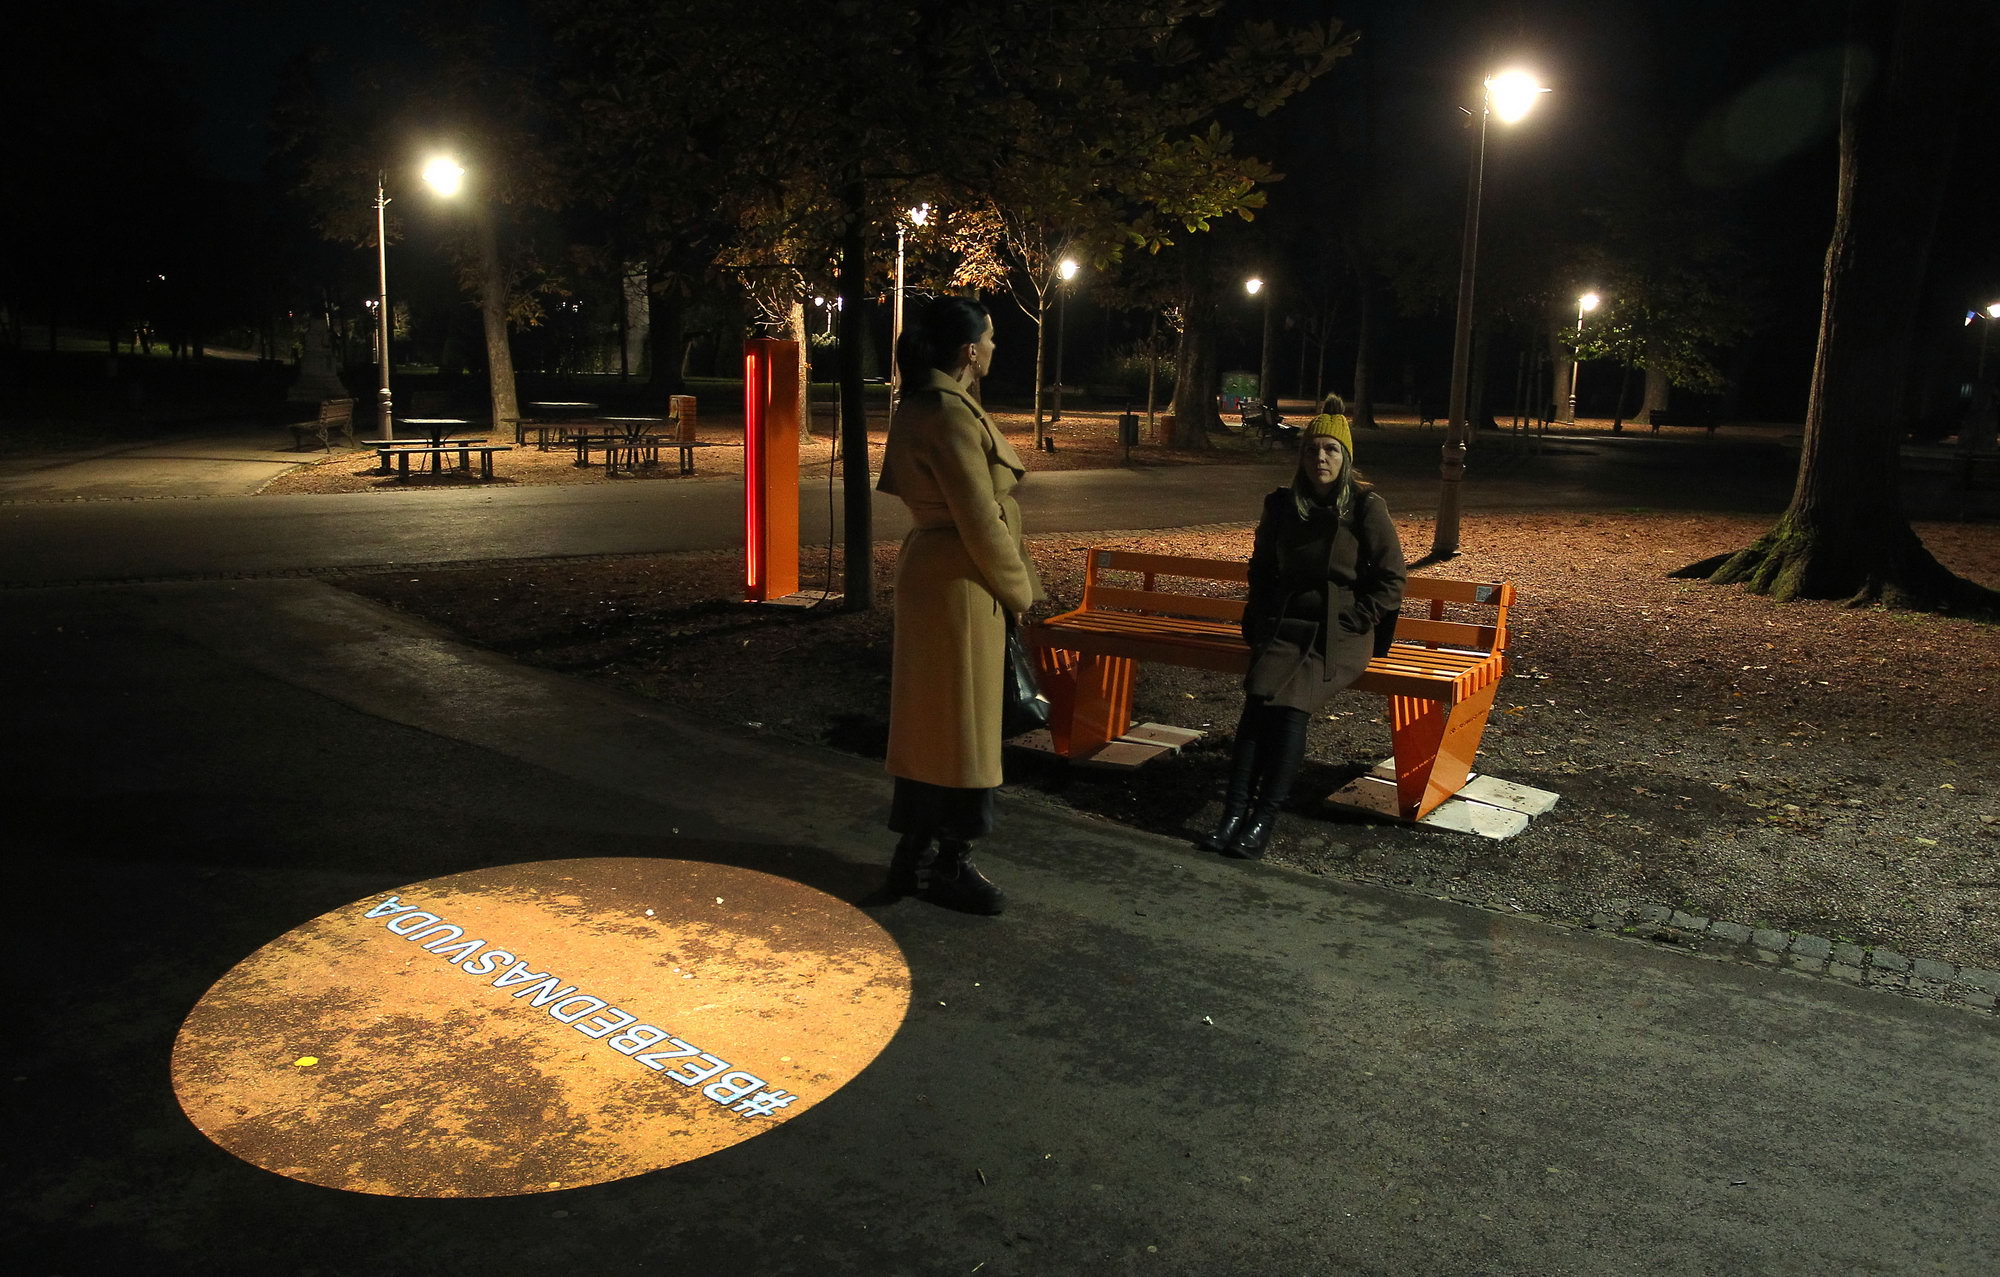 Visitors interact with the public exhibition at the Kalemegdan Park in Belgrade, Serbia.